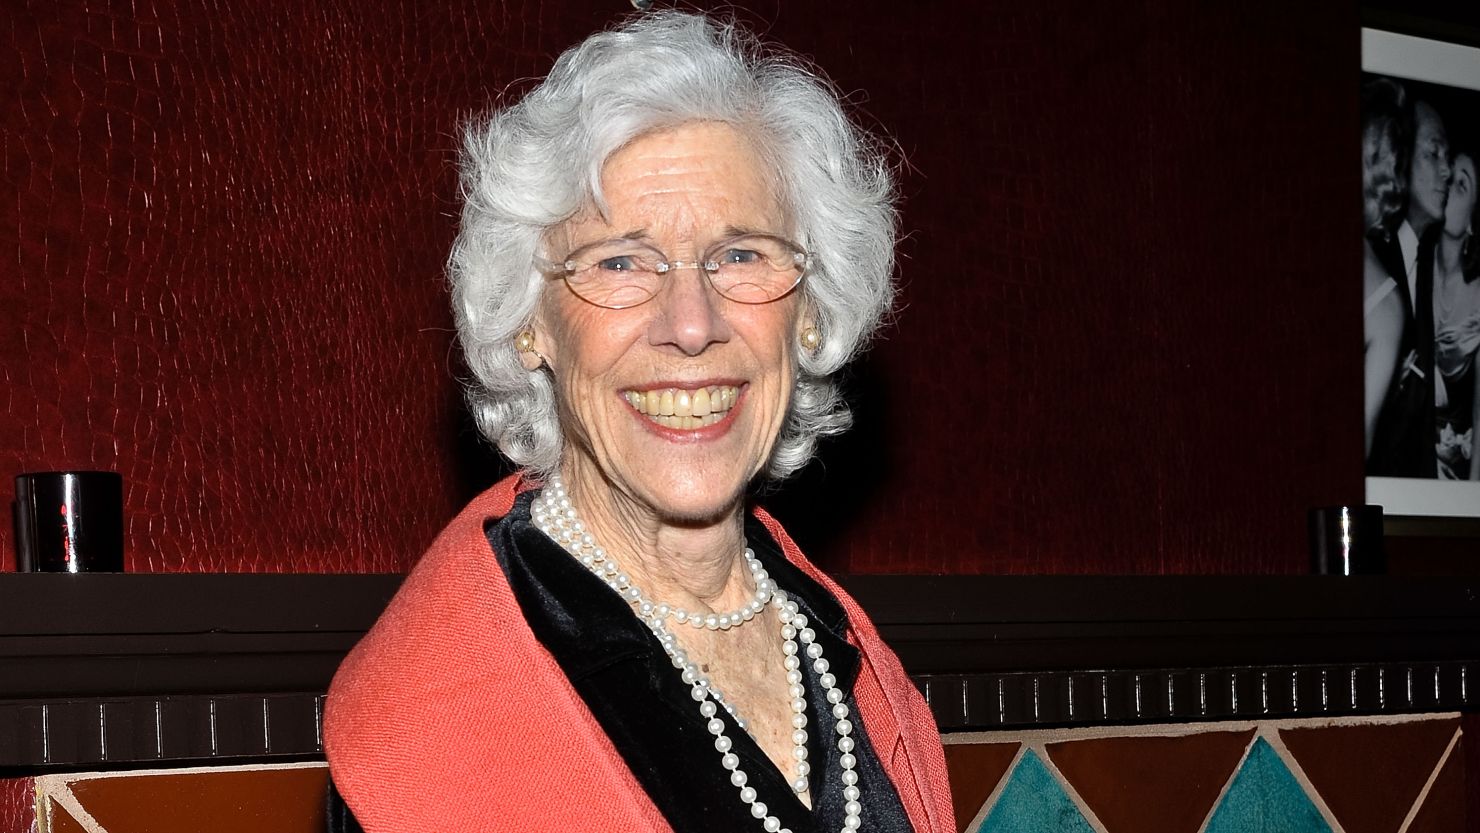 Frances Sternhagen at the 2013 opening night party for 'The Madrid' in New York City. 